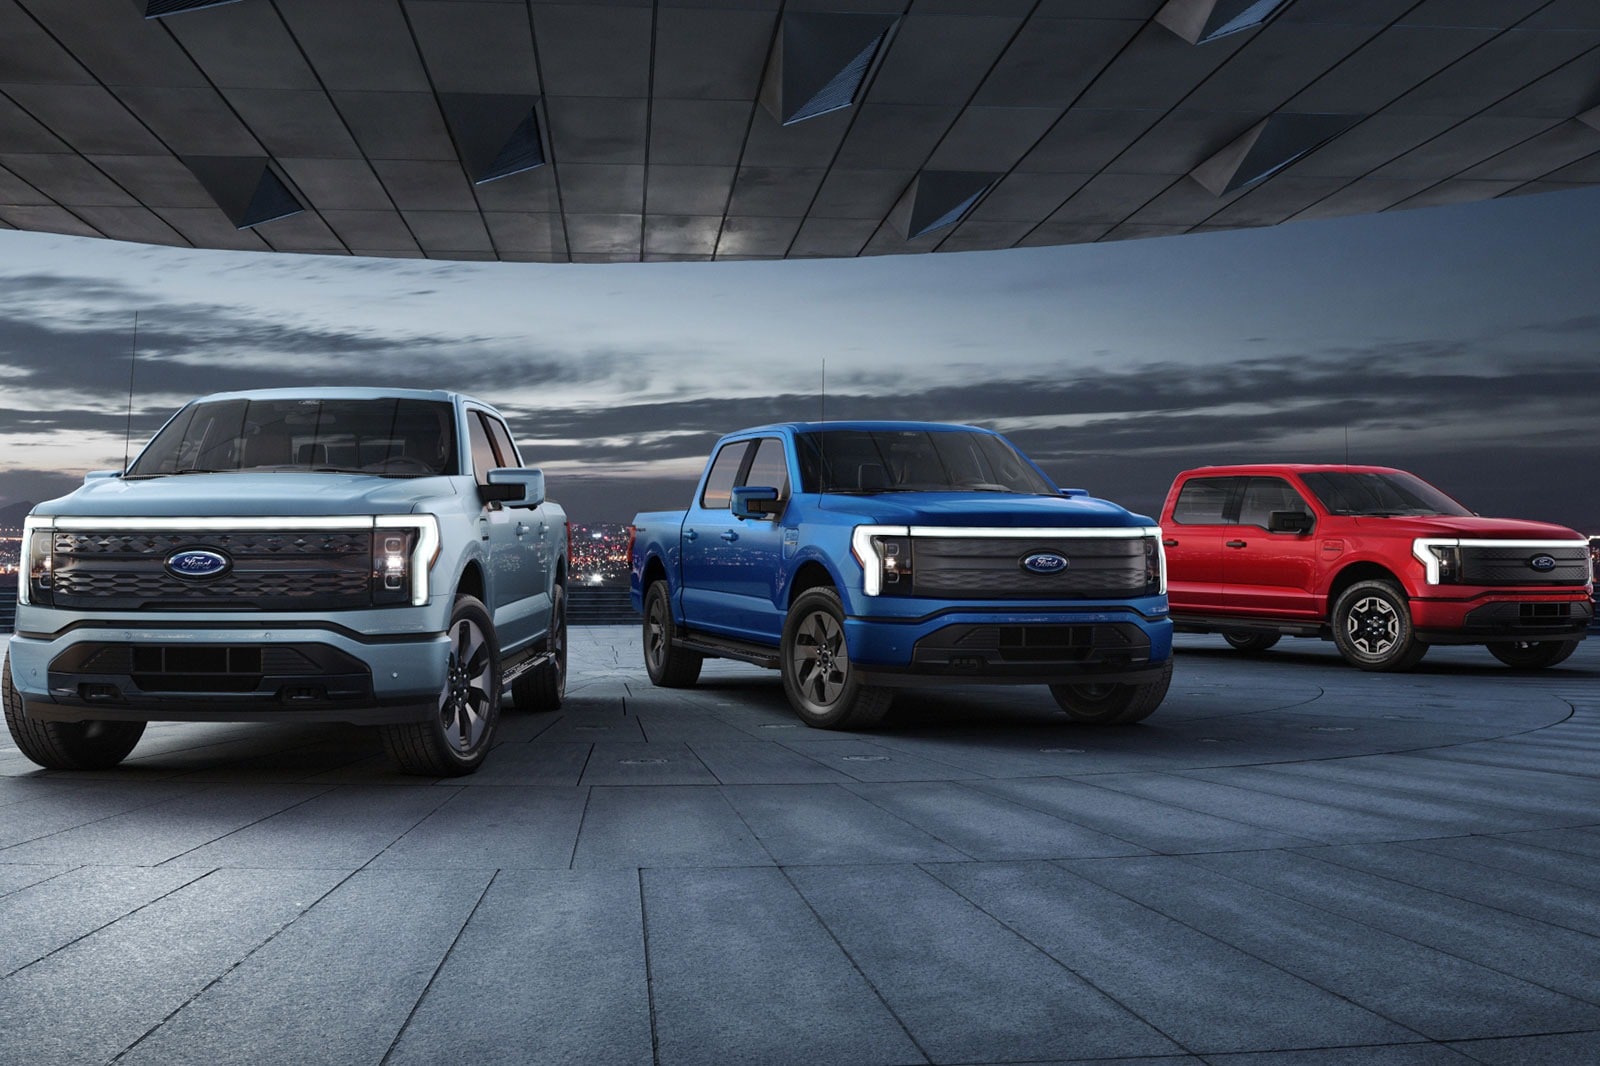 2022 Ford F-150 Lightning Is an Electric Truck With 563 Horsepower, Can Power Your House